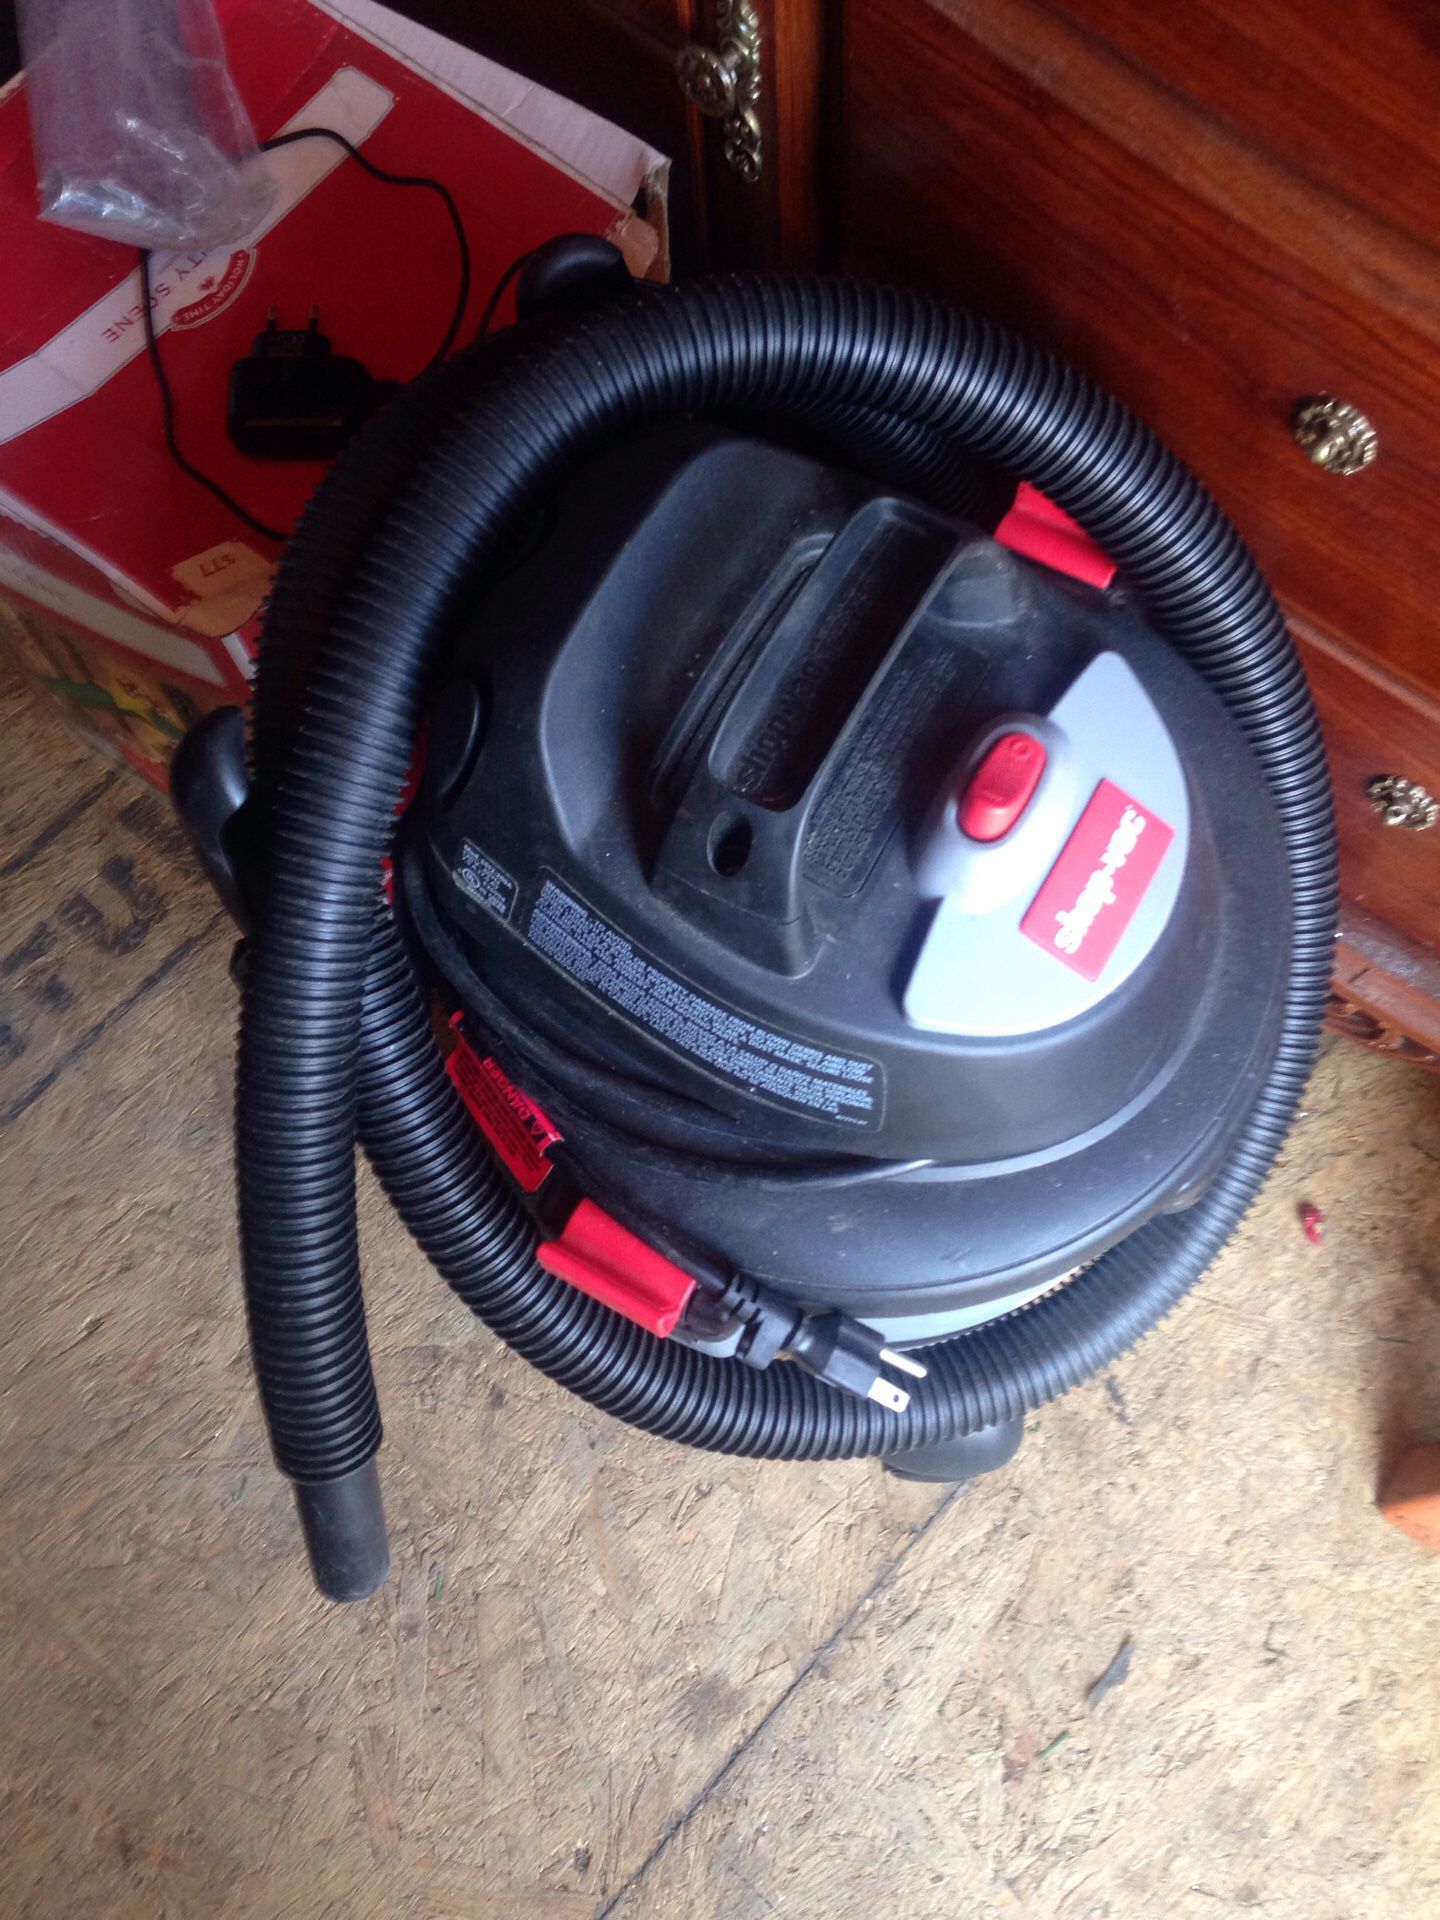 Shop vac only used twice